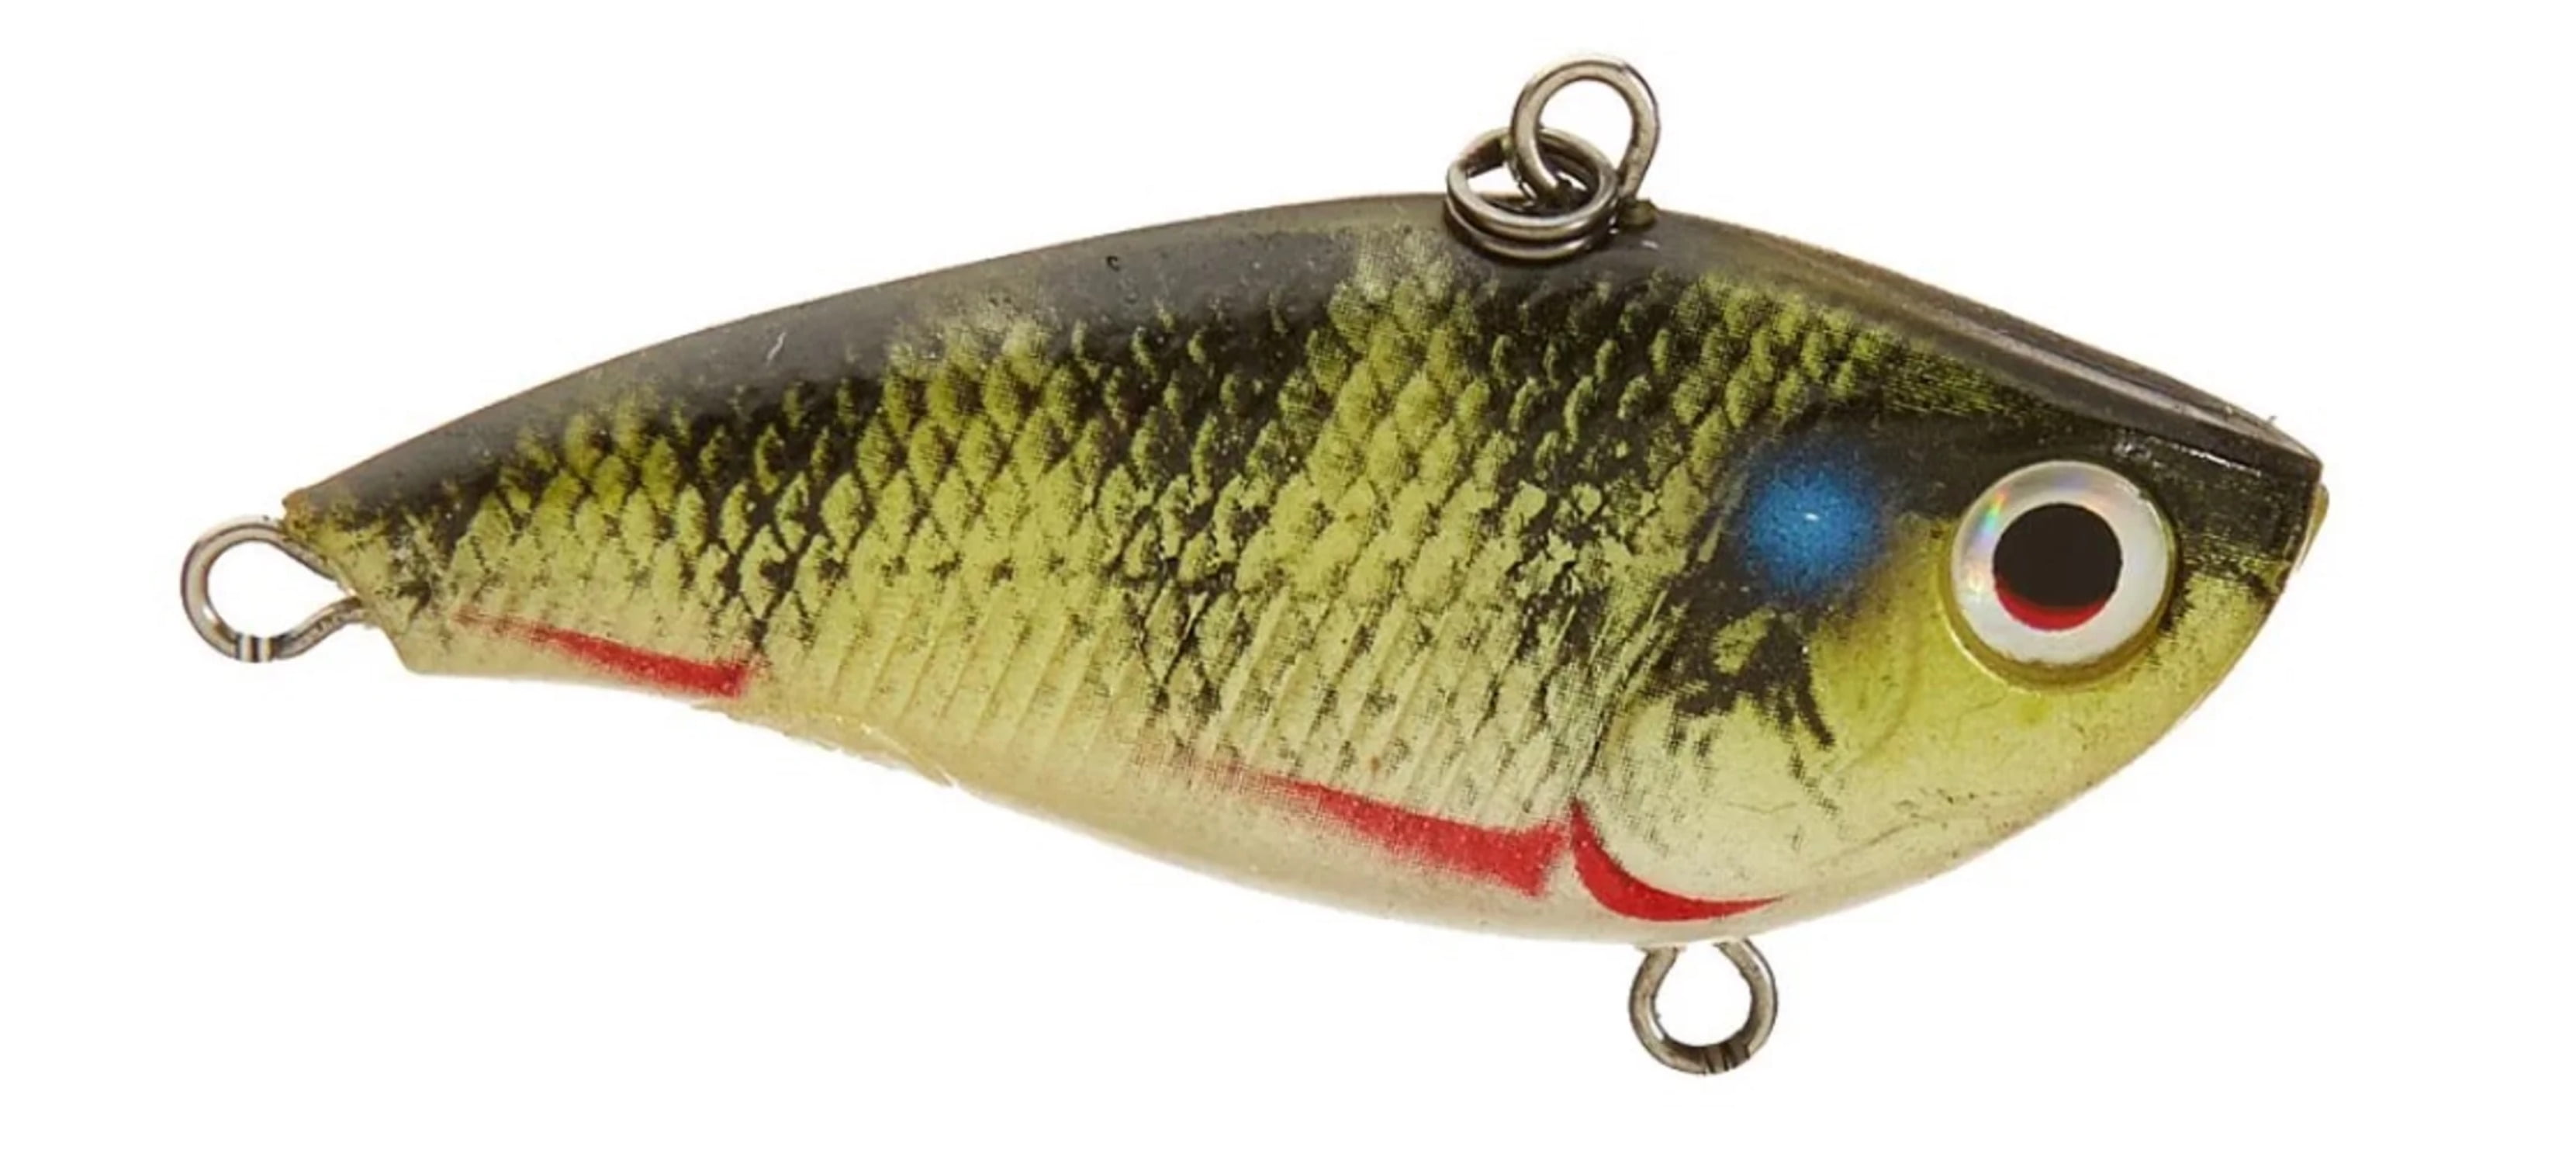 4D Fishing Lure Eyes Tackle Craft Fish Eyes For Unpainted Crankbaits And  Hard Bodies From Sxsw, $5.79